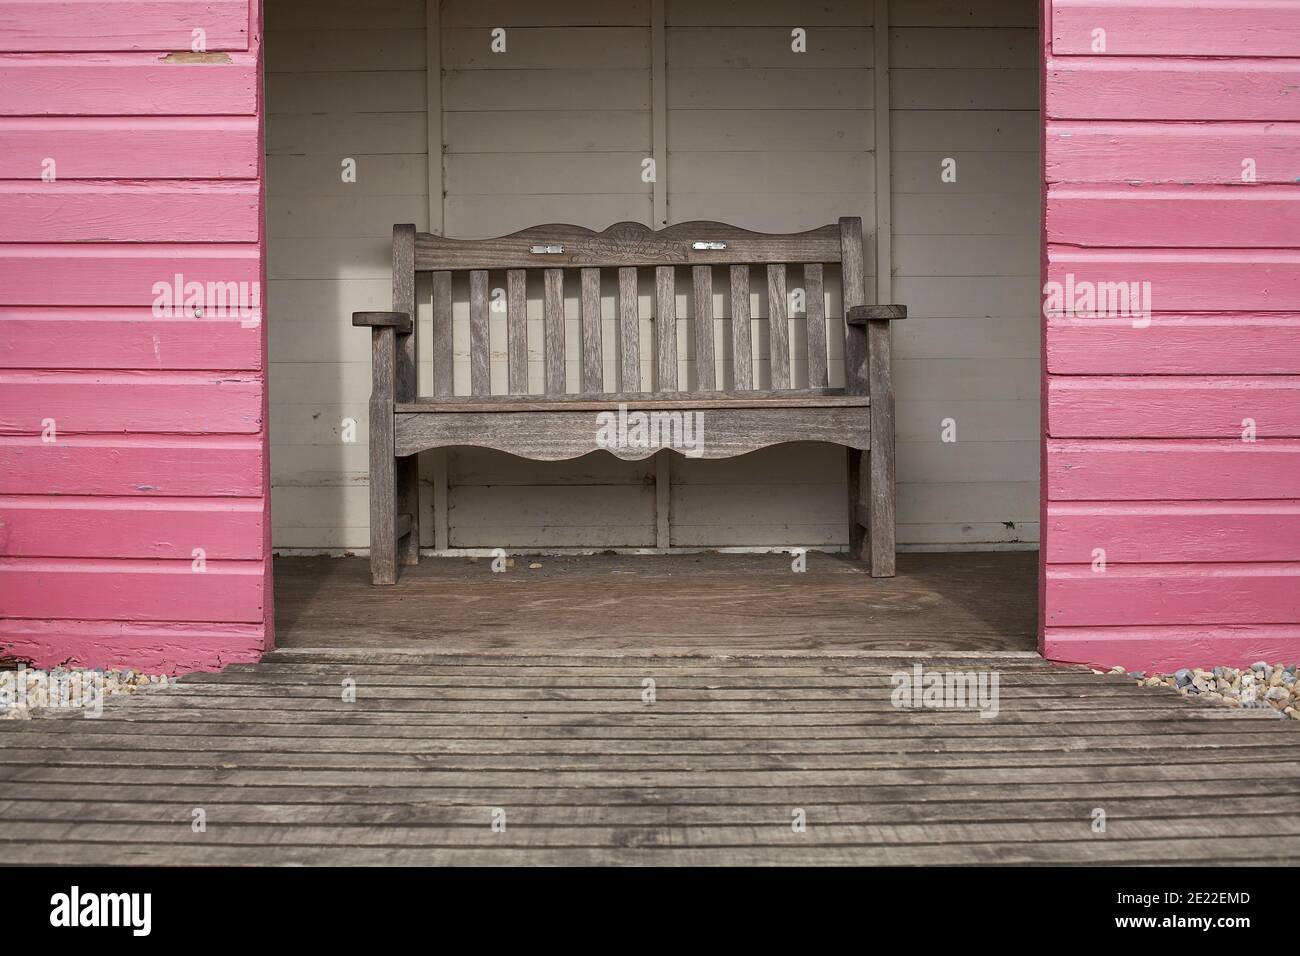 bench in pink shelter Stock Photo